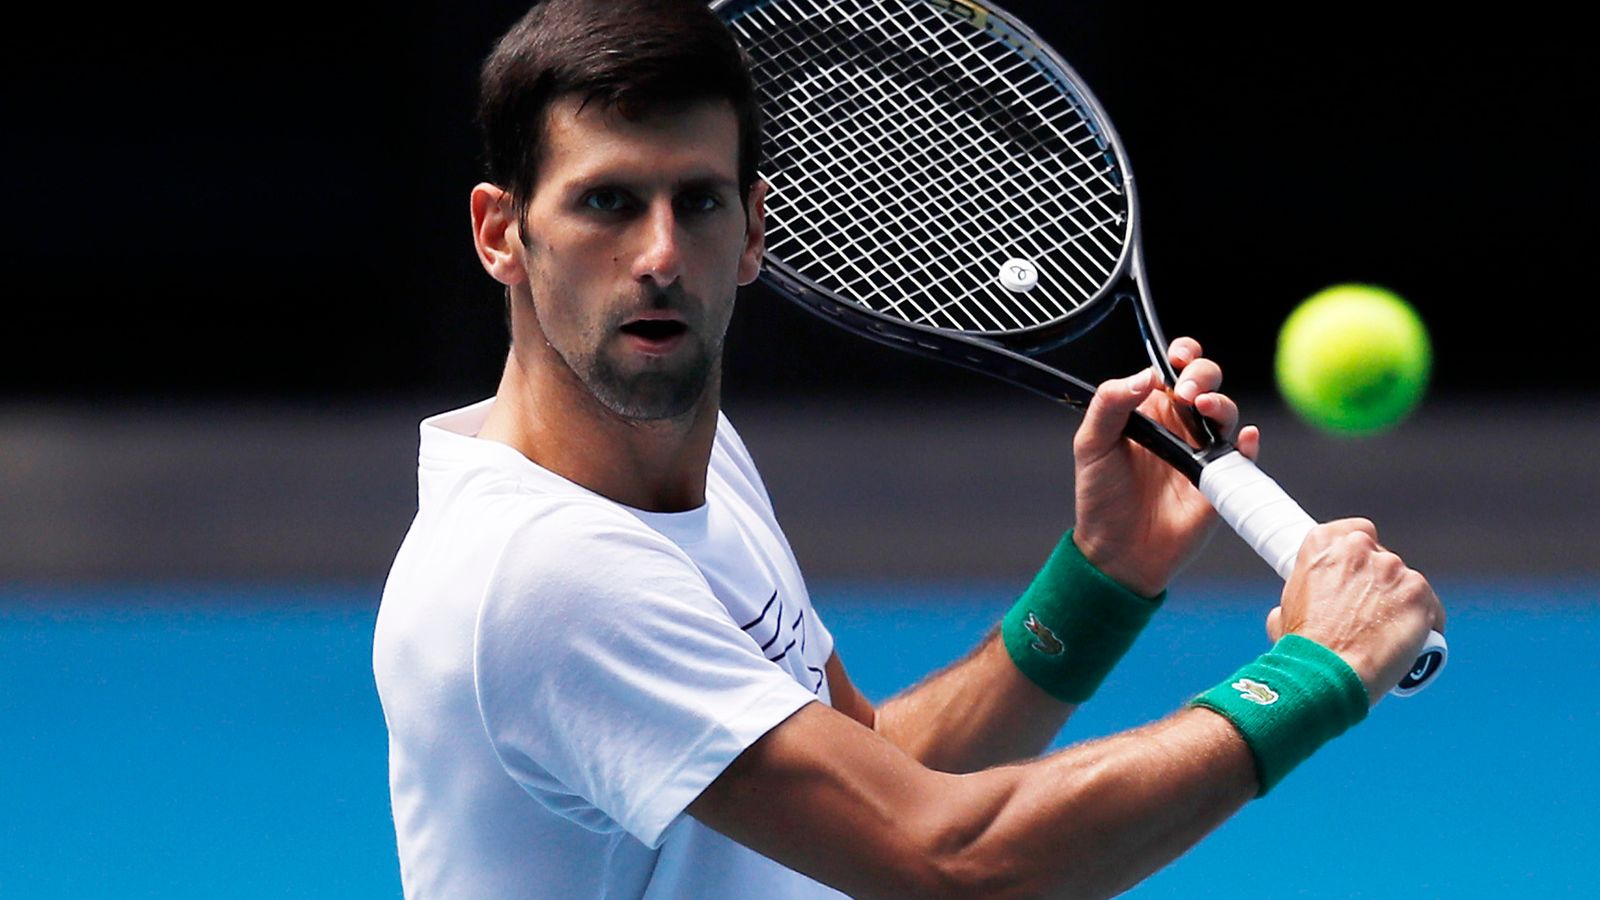 Novak Djokovic admits the Next Gen are within 'a set' of himself